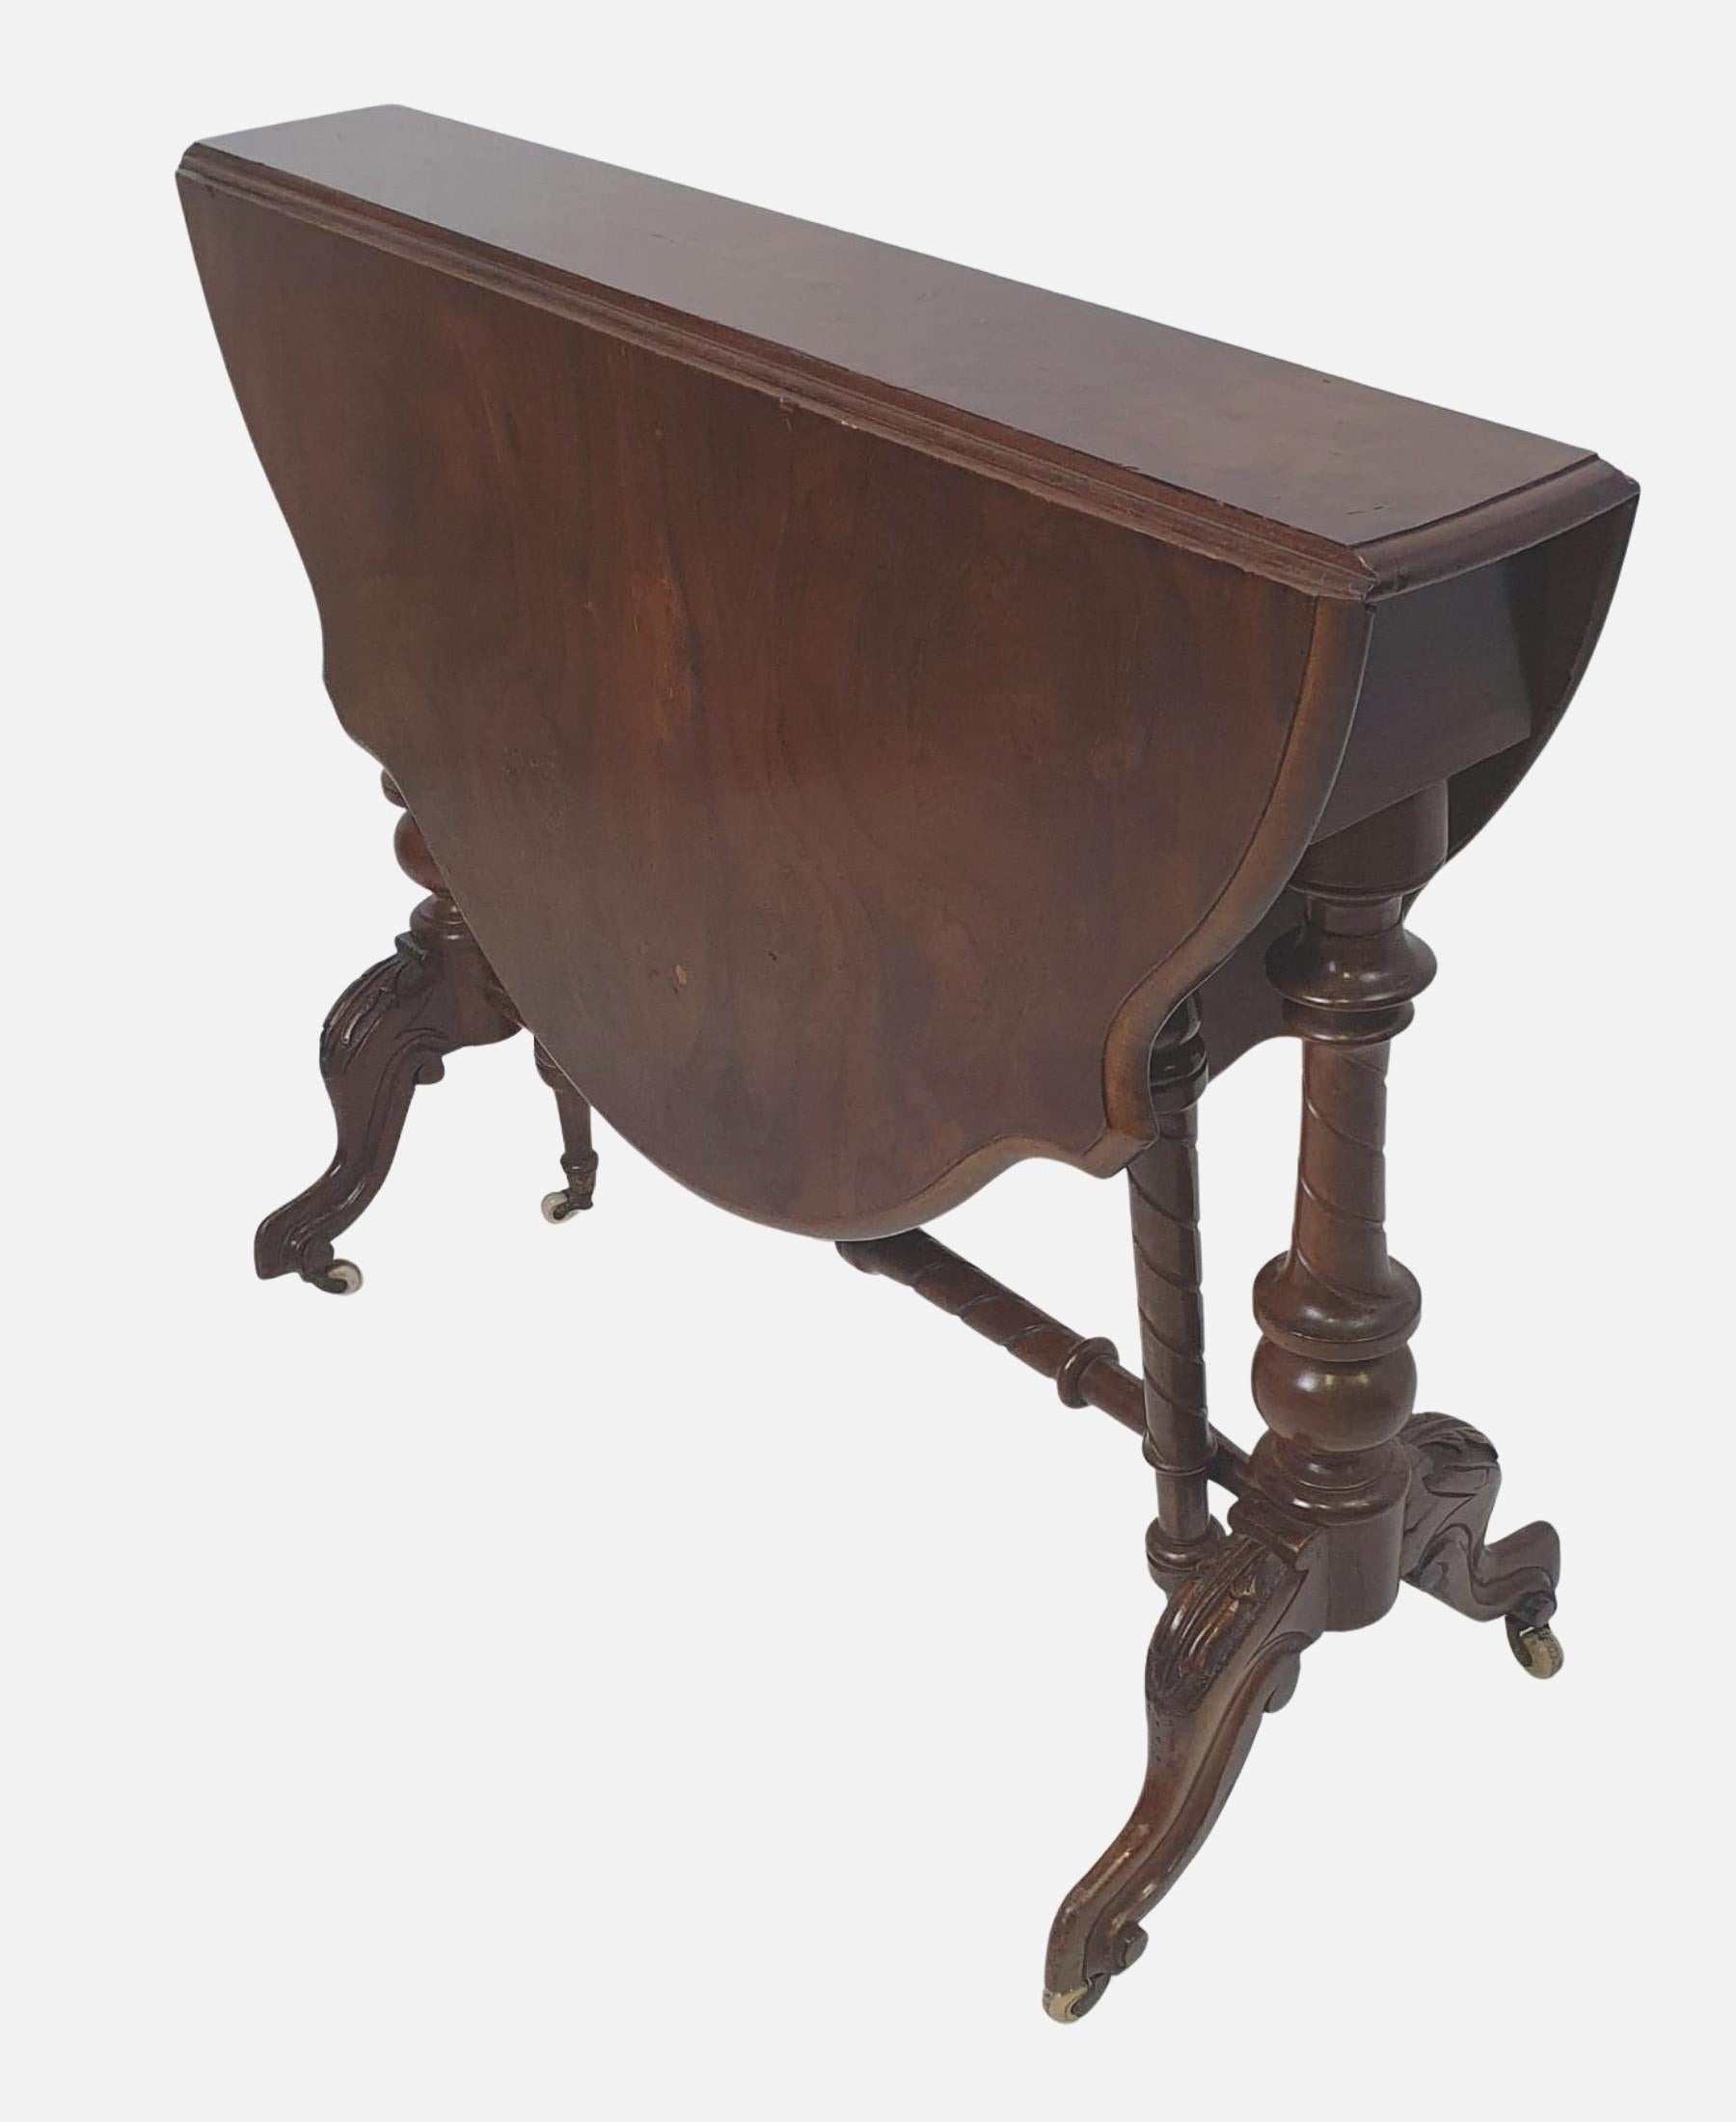 19th Century large size walnut sutherland table, the well figured shaped and moulded top with two drop leaves to either side raised over two turned gate action legs with carved detail and two beautifully turned baluster supports with elegant